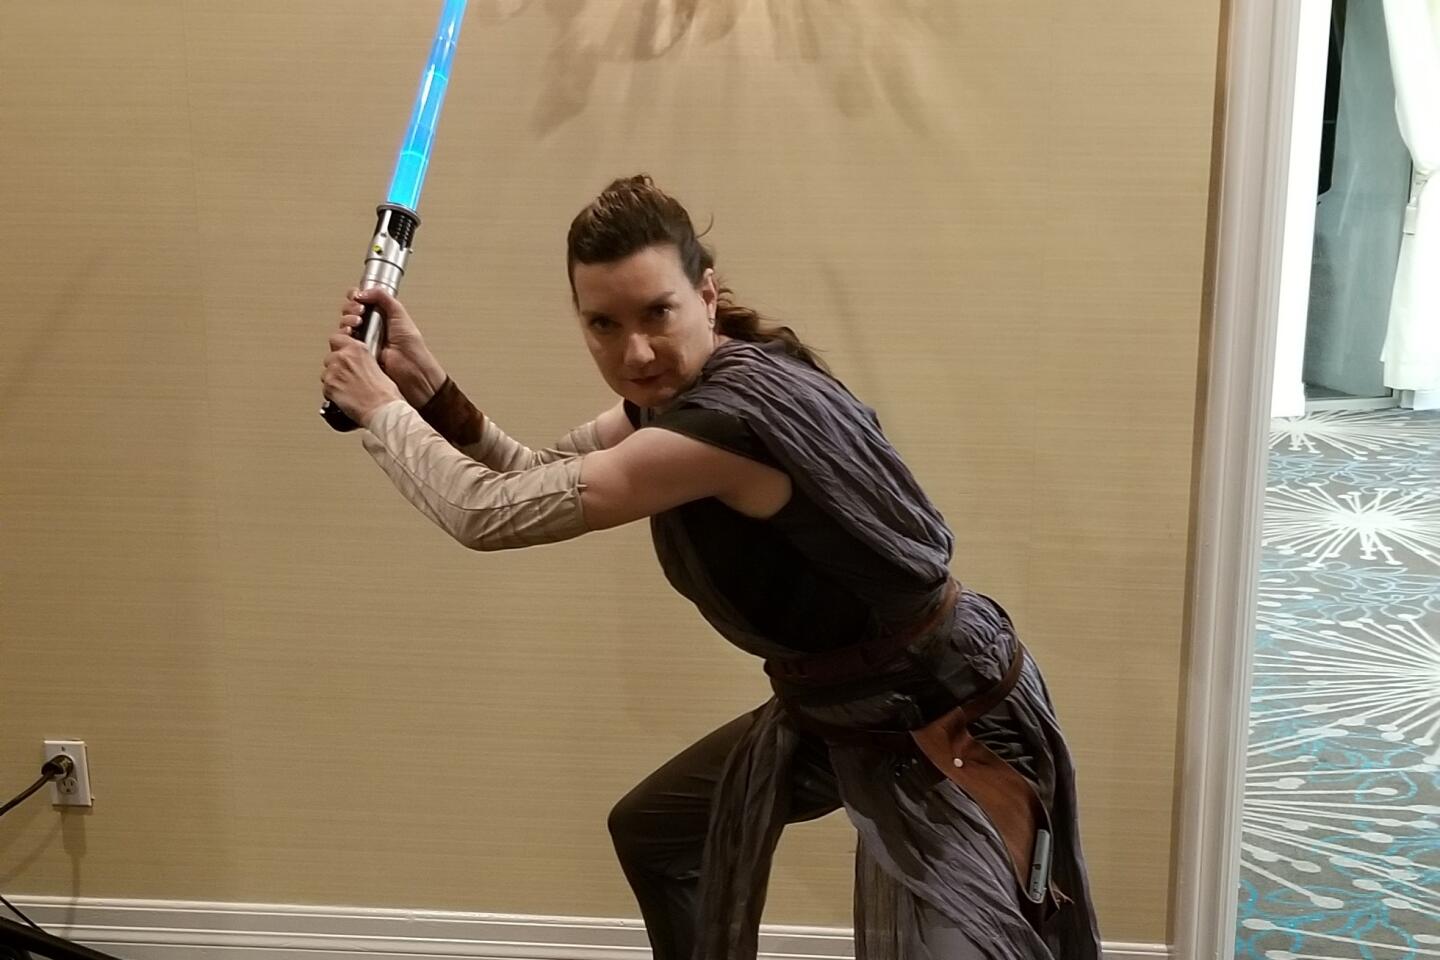 The Force is strong with Debra Erickson, who rocks her Star Wars Rey costume.